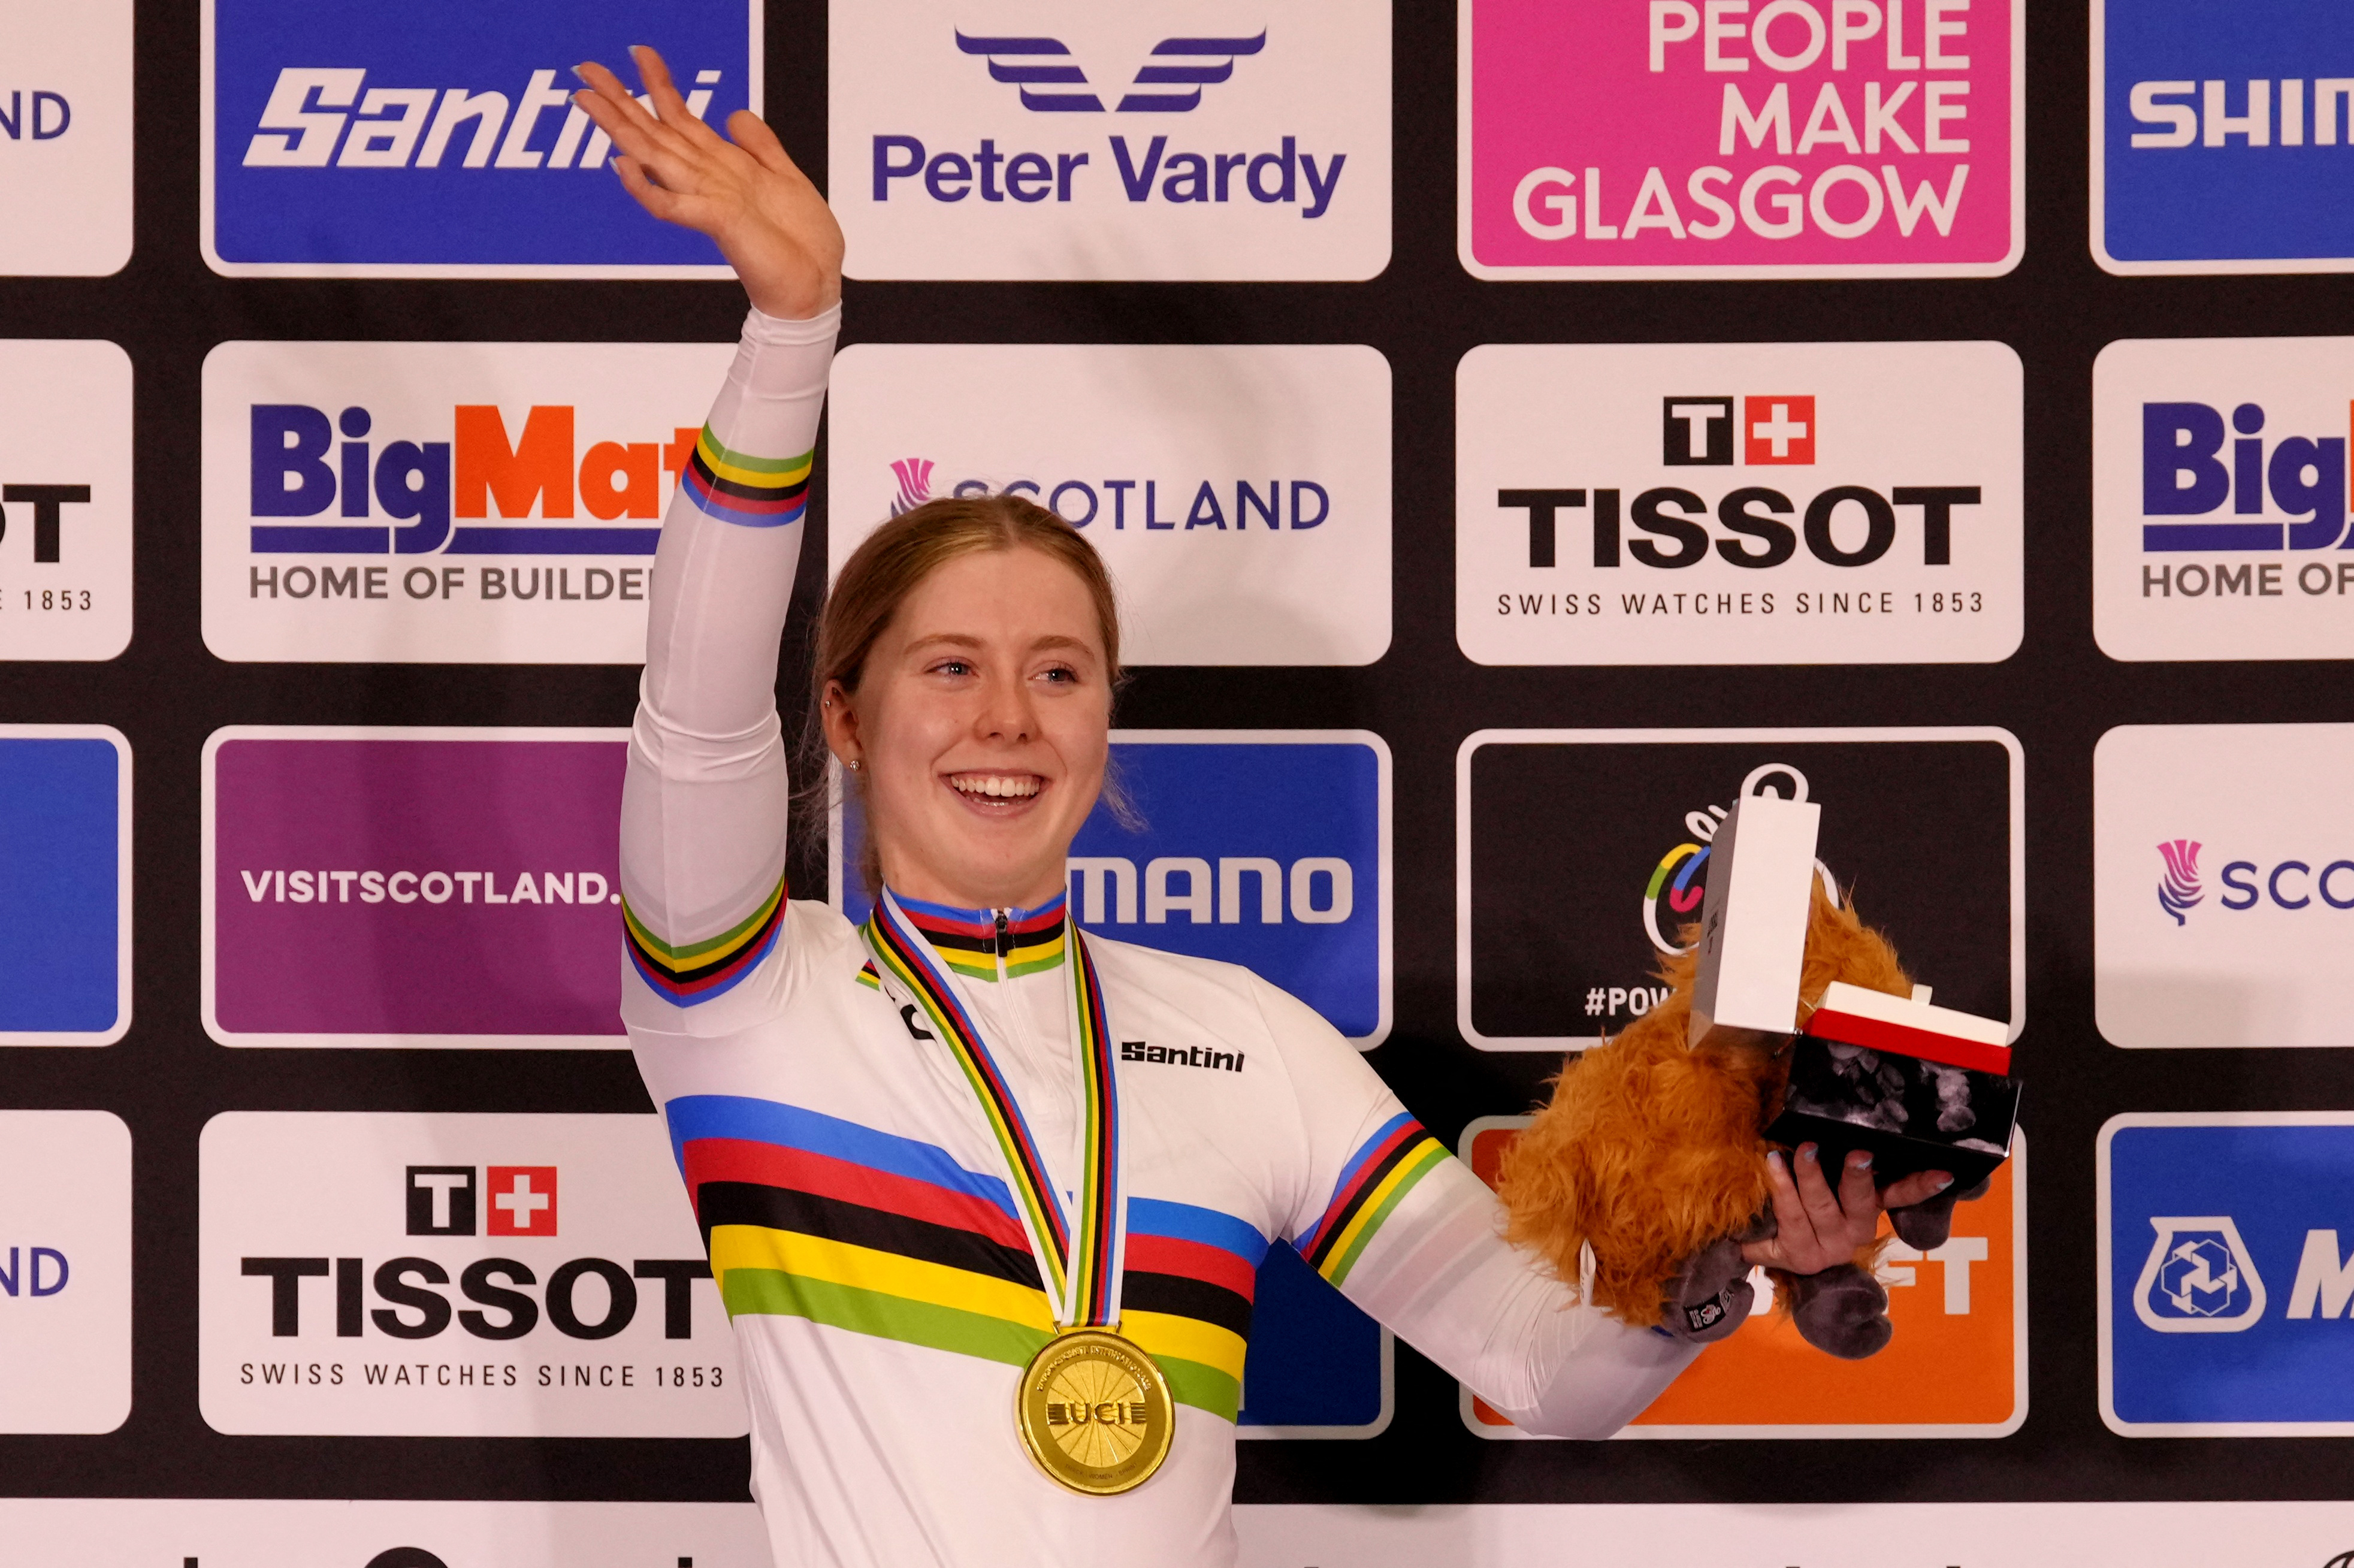 The history of the World Championships rainbow jersey